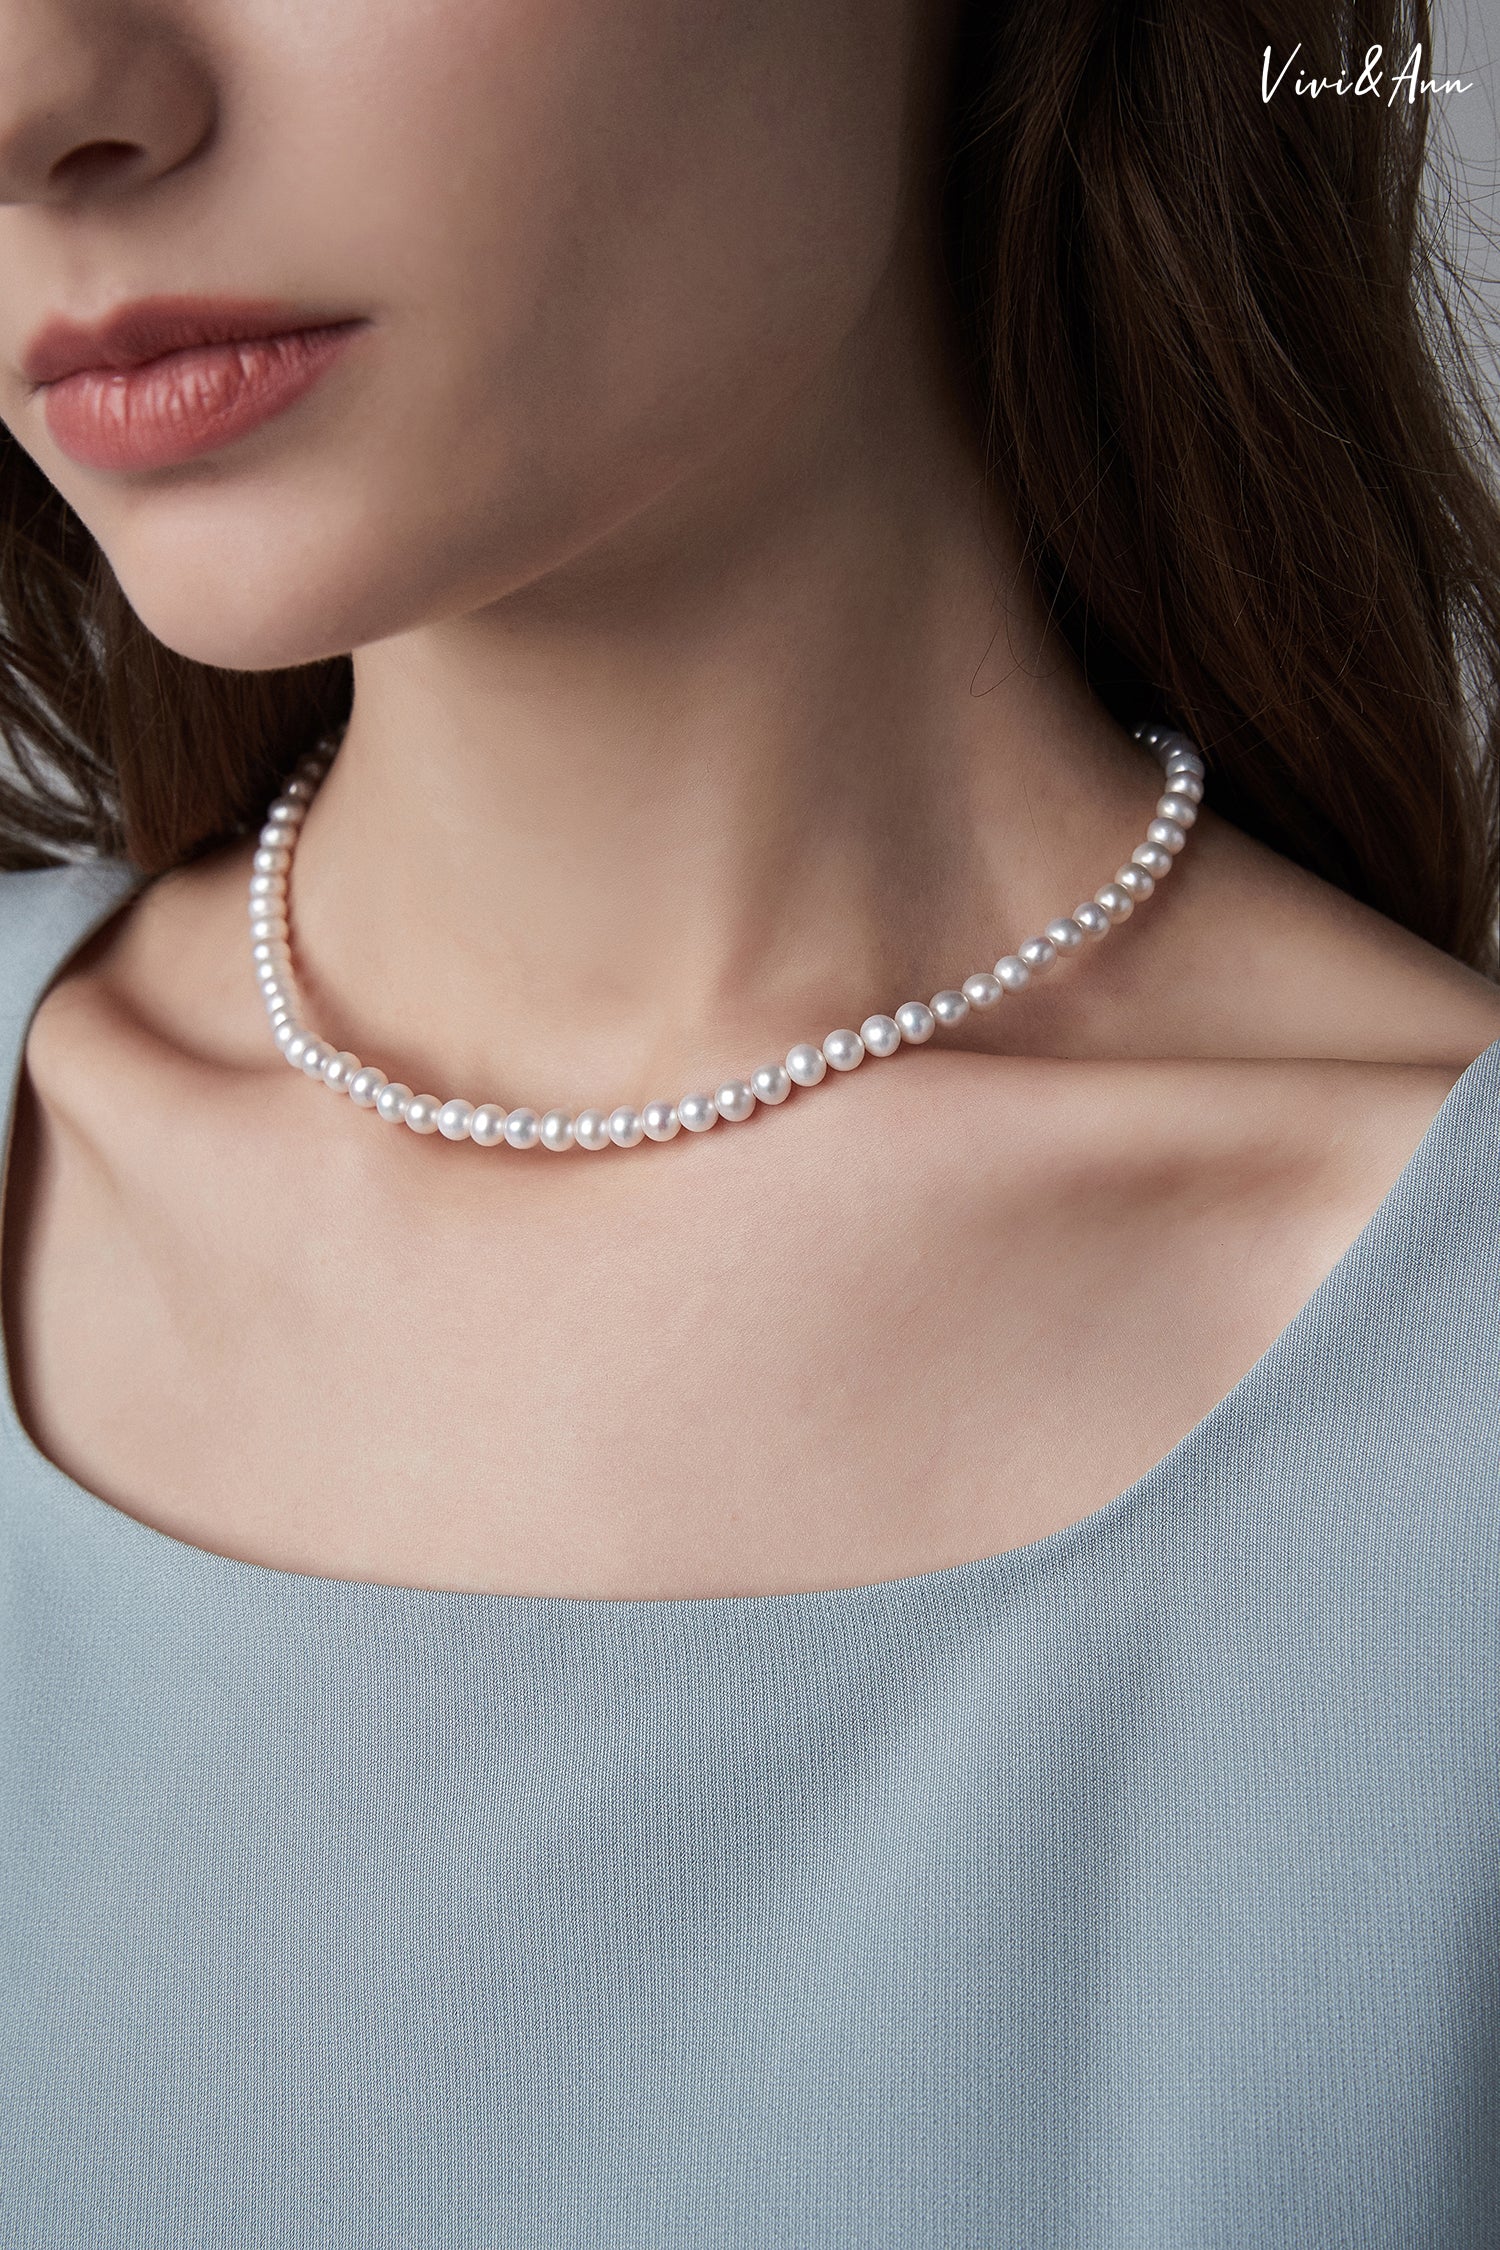 Freshwater Pearl Choker Necklace ,dainty White Pearl Necklace, Bridal  Necklace , Gift for Her - Etsy | White pearl necklace, Bridal necklace,  Wedding accessories